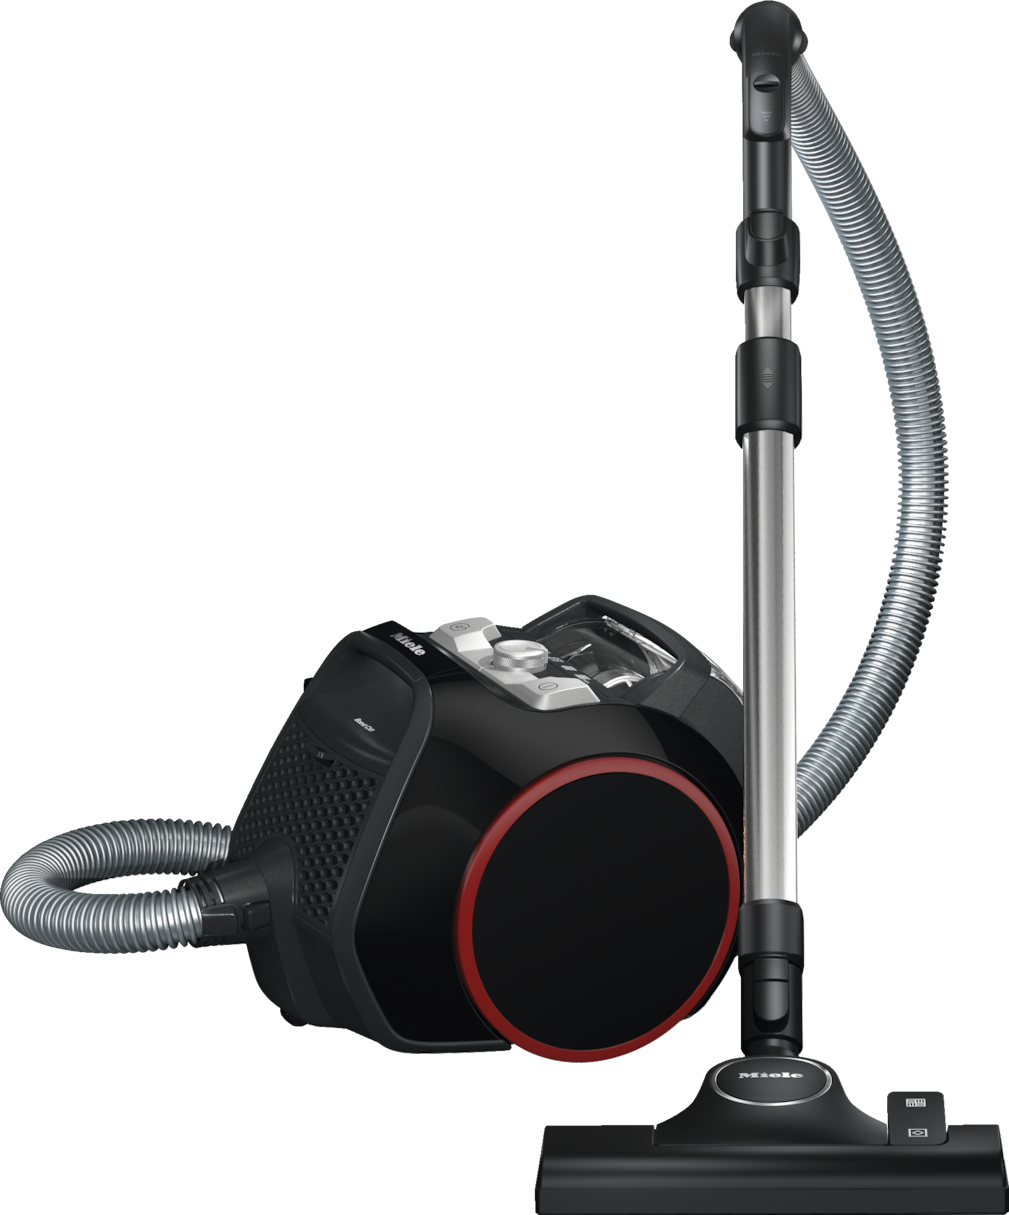 Miele Boost CX1 Bagless Canister Vacuum Cleaner